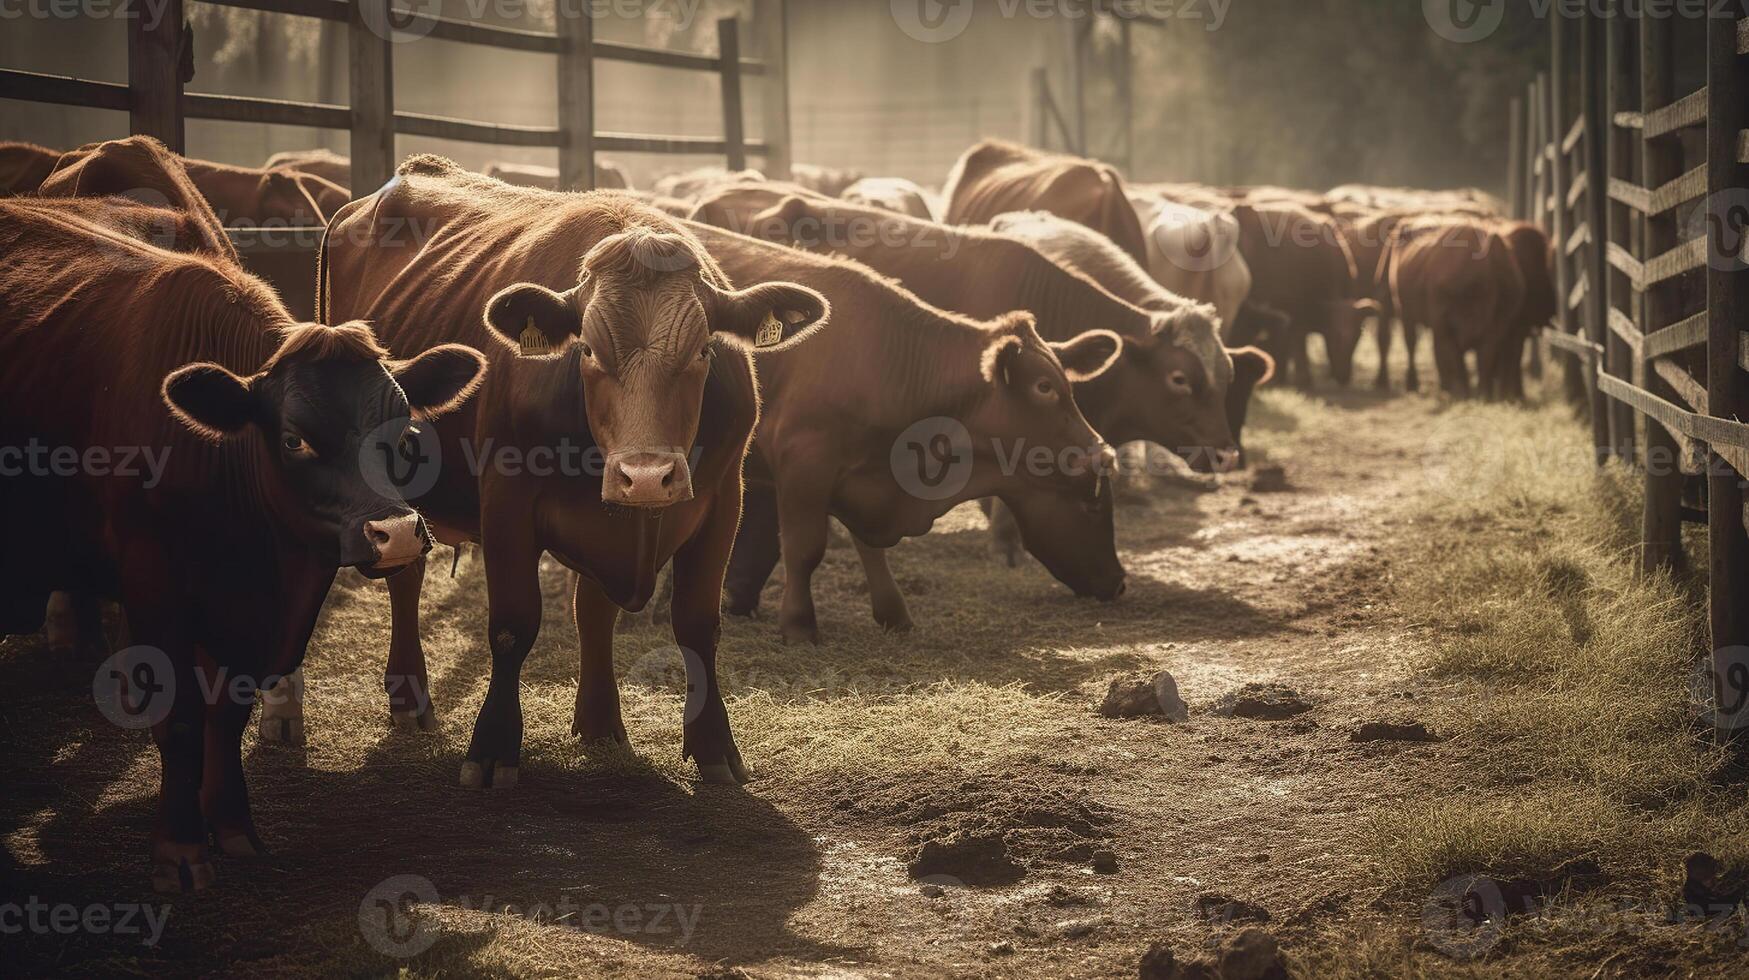 Beef cattle cows eating at the farm, image photo